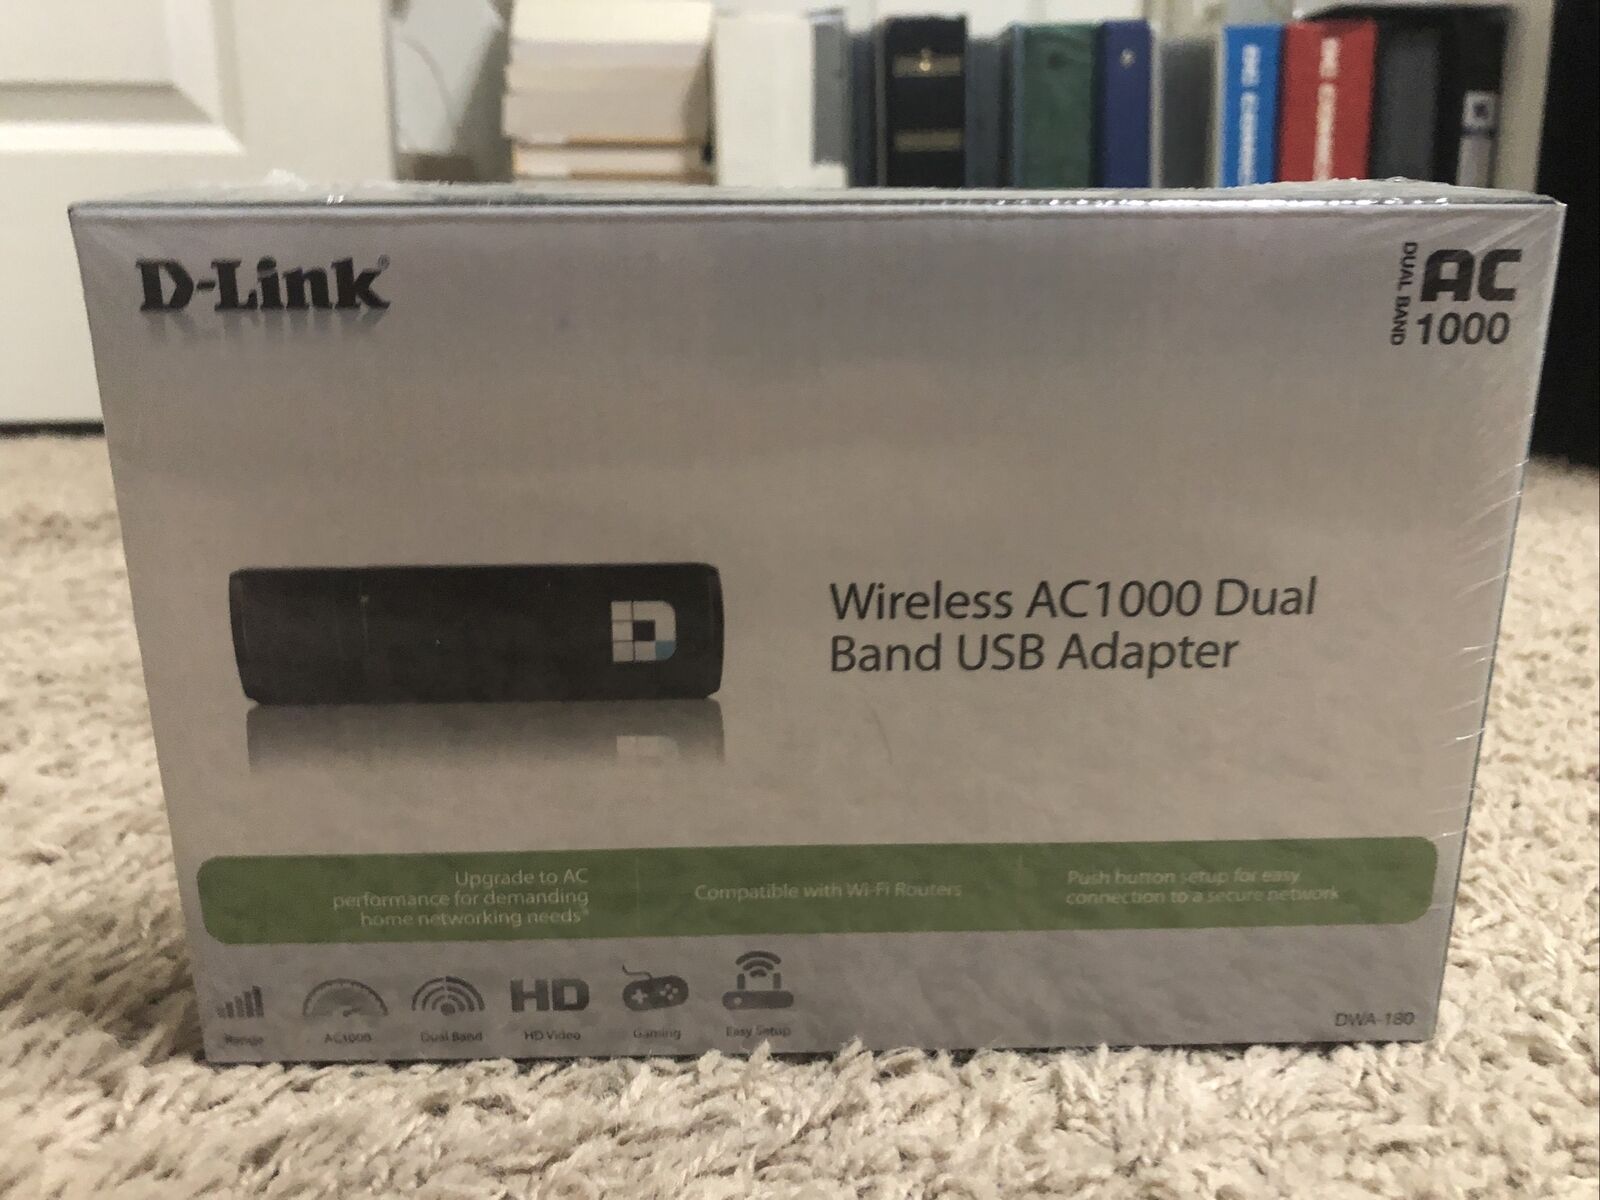 D-Link Wireless AC1000 Dual Band USB Adapter Brand New